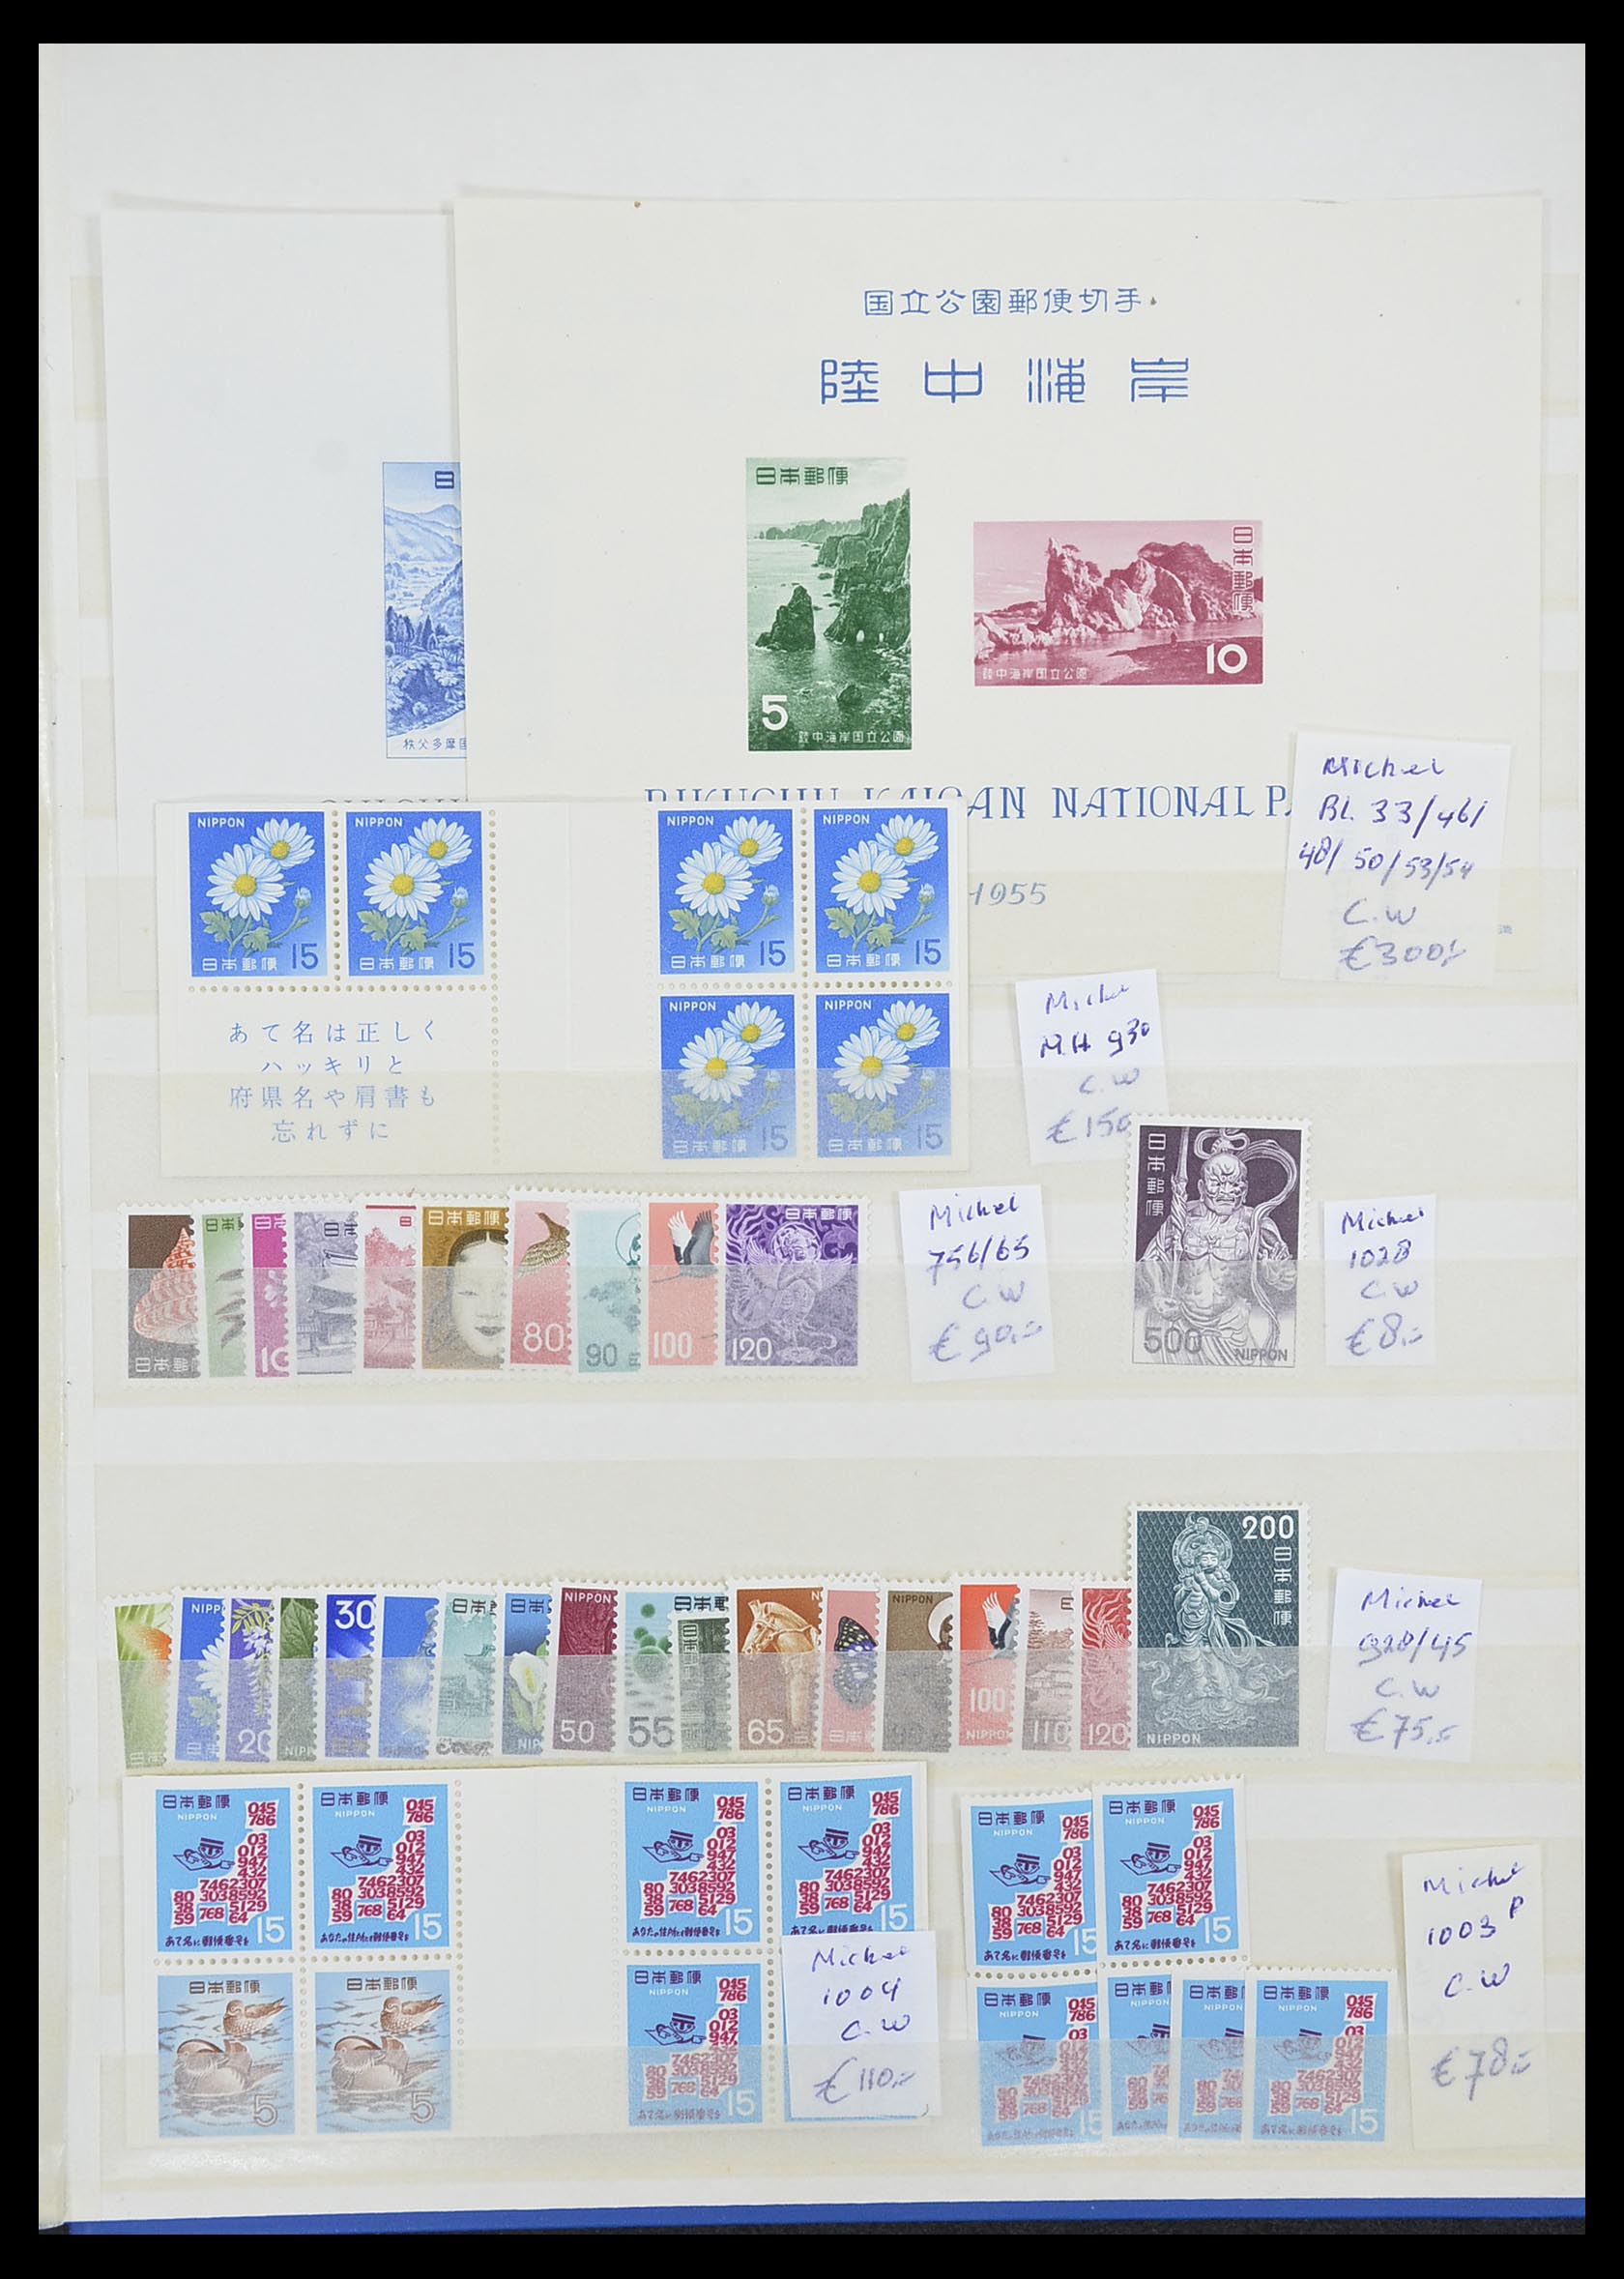 33447 028 - Stamp collection 33447 World key stamps 1900-1955.